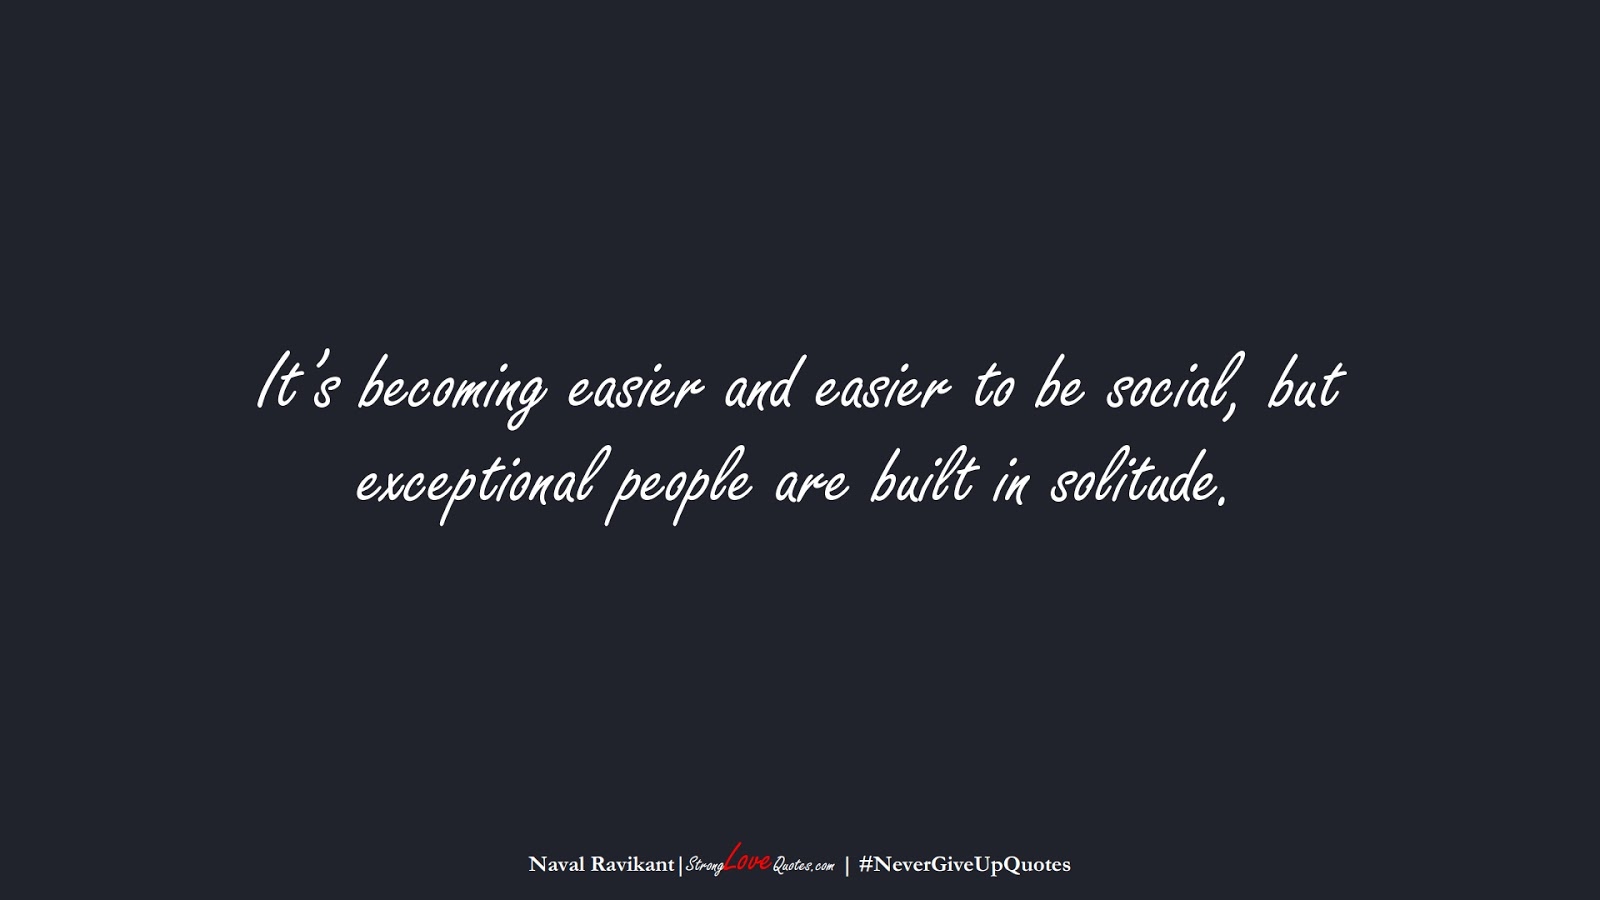 It’s becoming easier and easier to be social, but exceptional people are built in solitude. (Naval Ravikant);  #NeverGiveUpQuotes